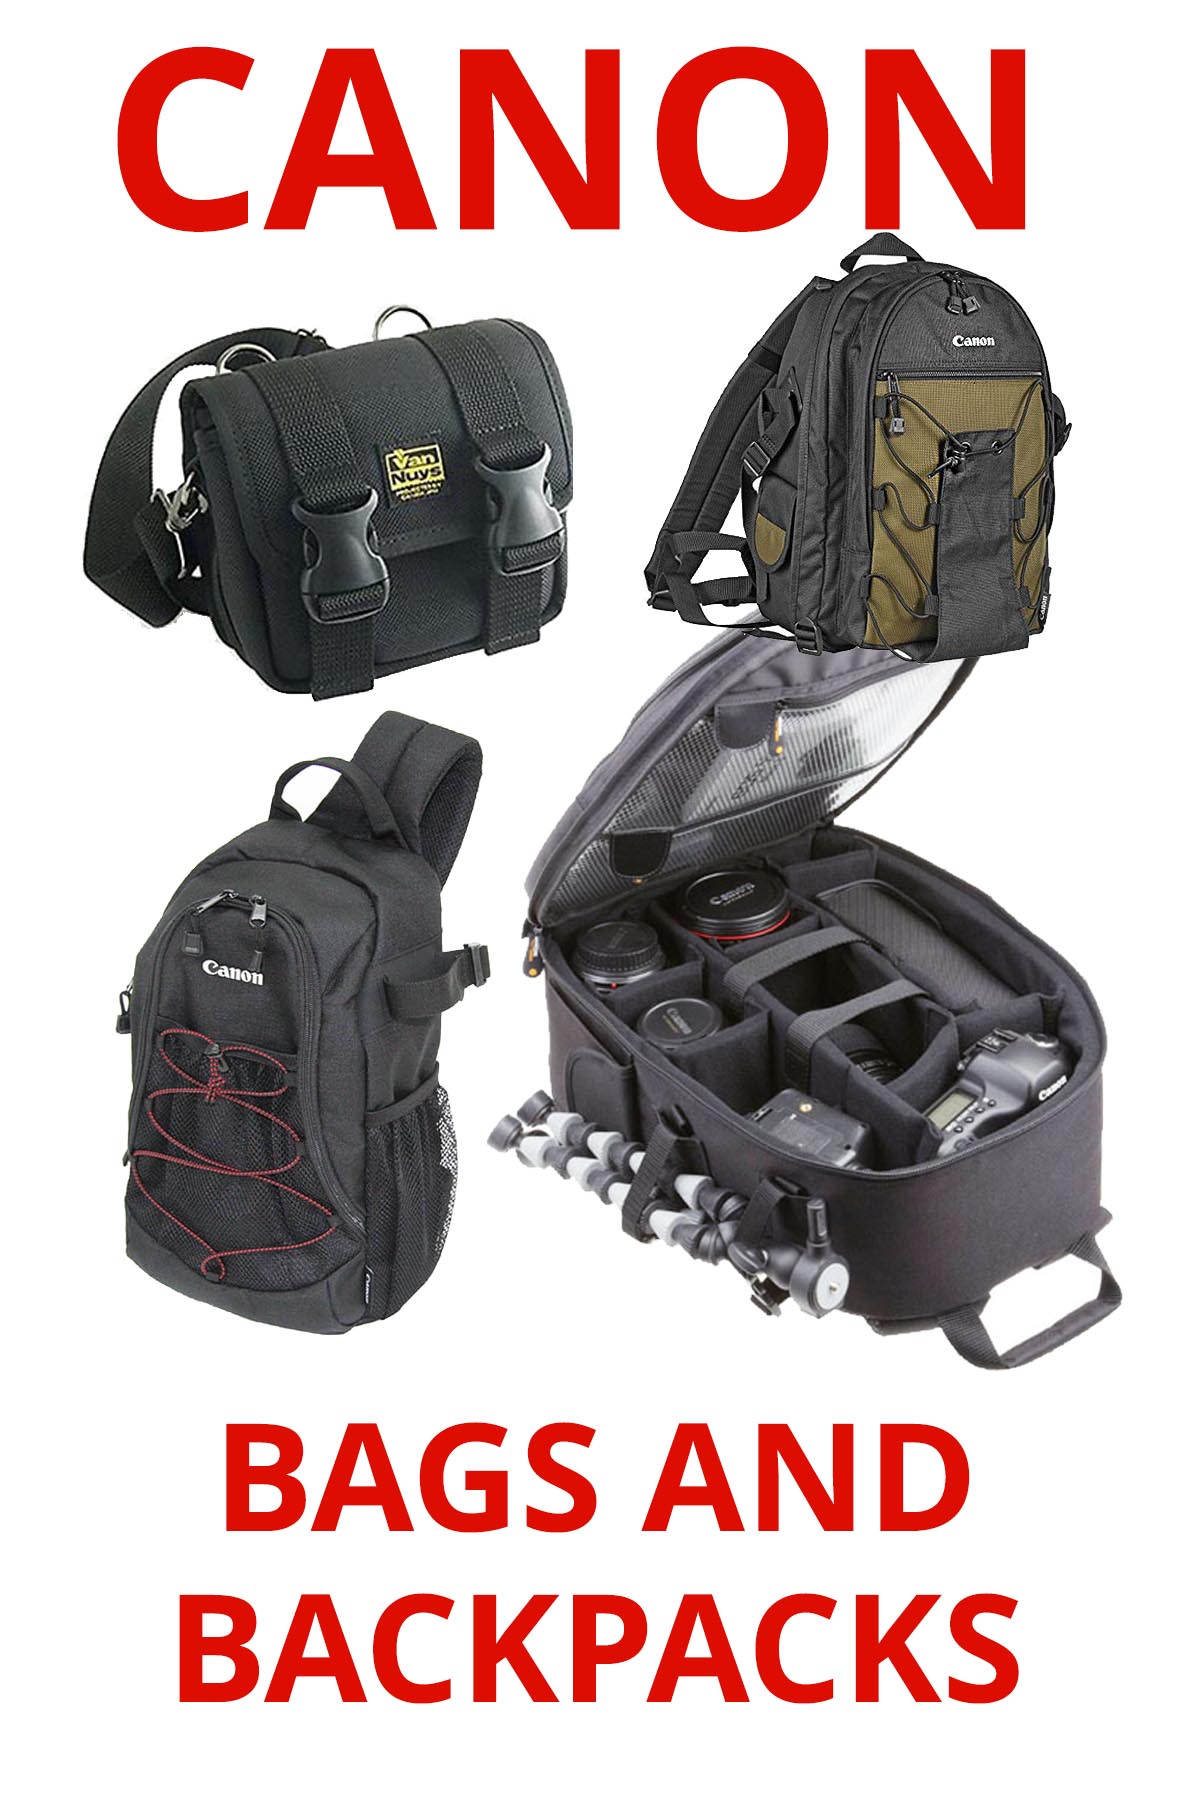 Canon bags and backpacks